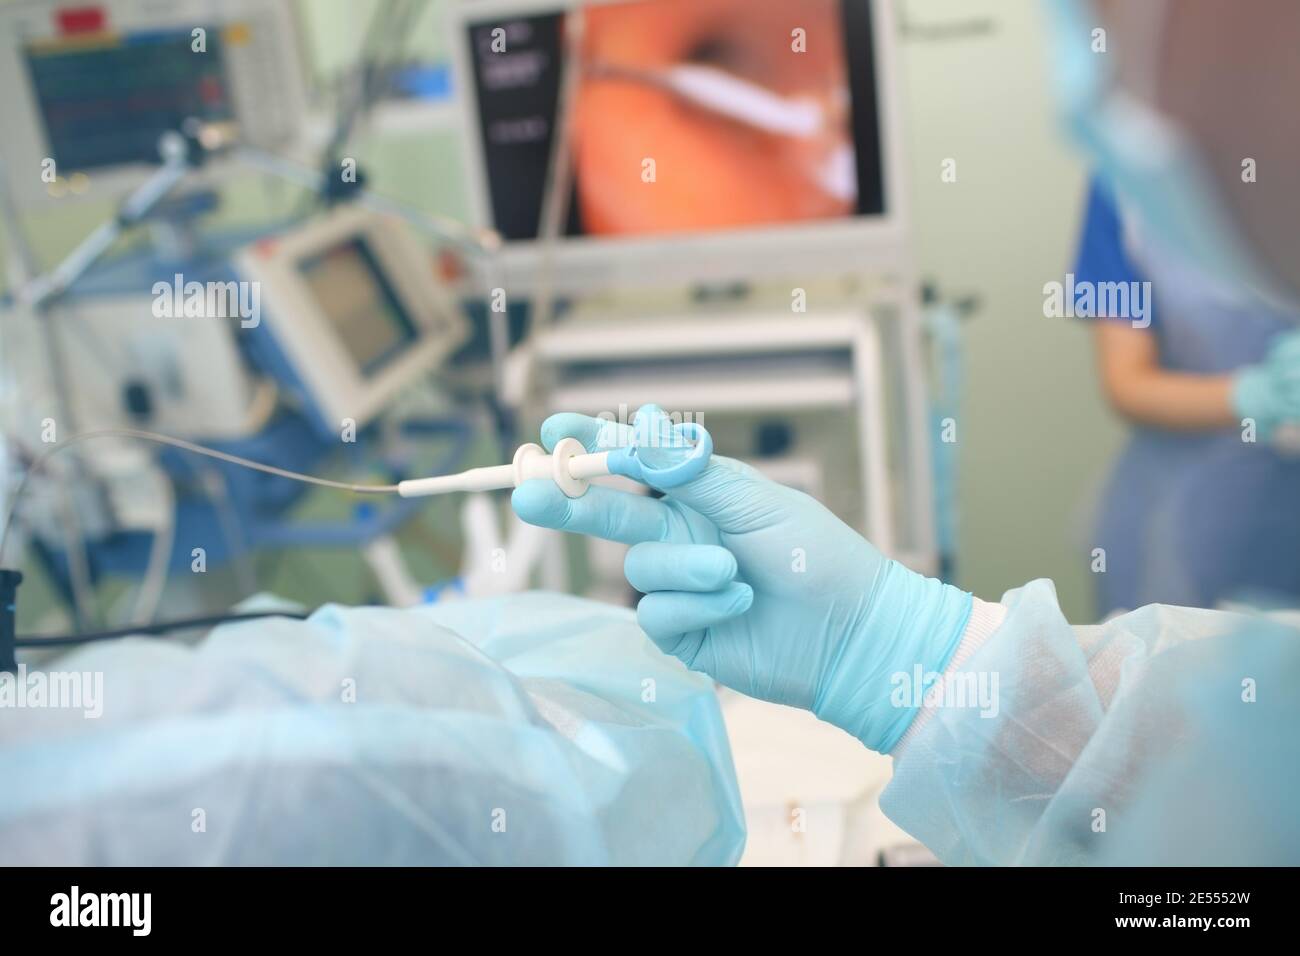 Female doctor performs endoscopy procedure in the hospital. Stock Photo